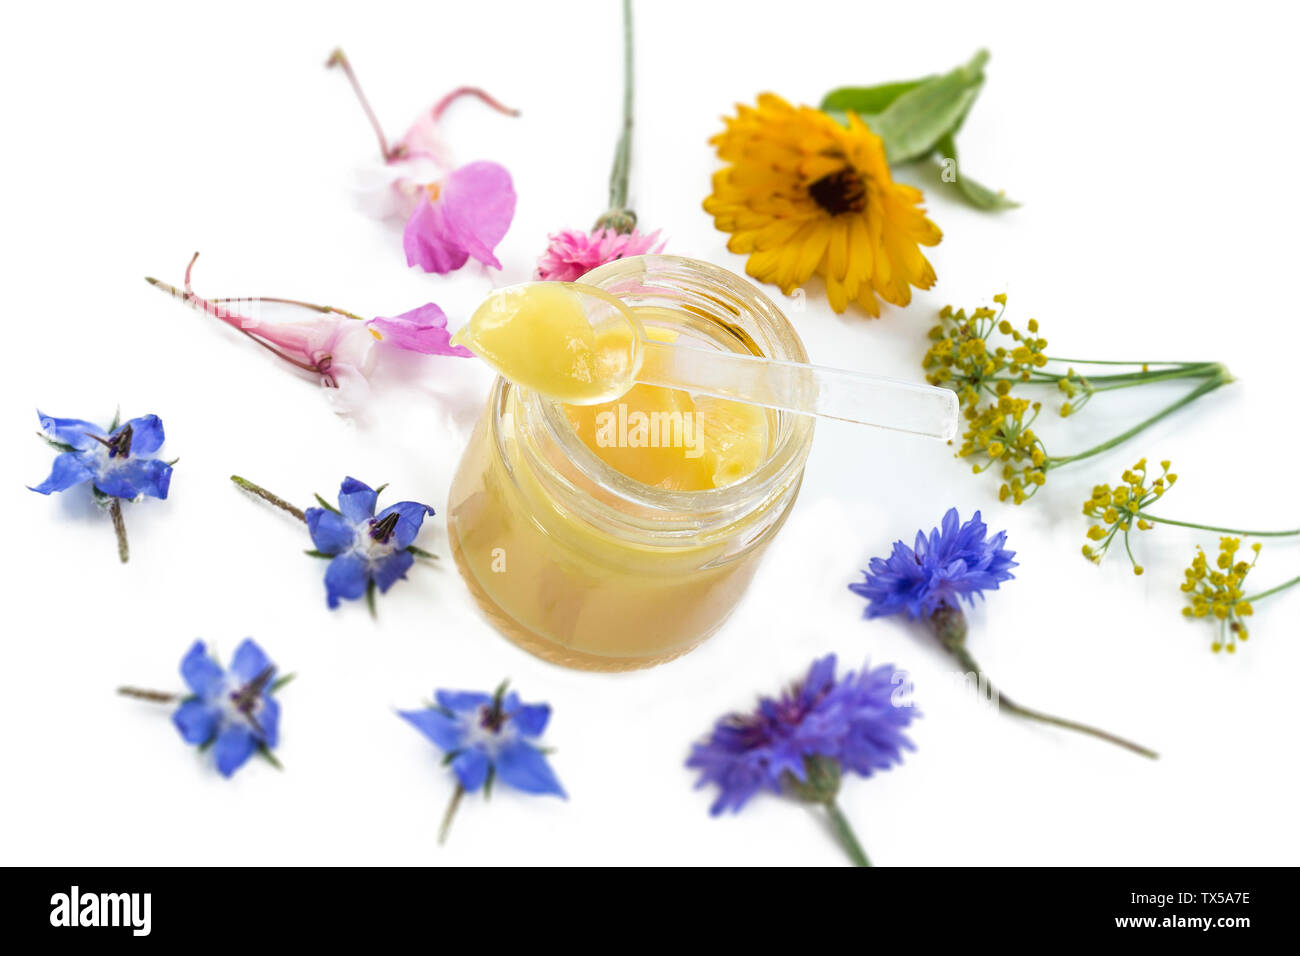 Raw organic royal jelly in a small bottle with litte spoon on small bottle surrounded by flowers on old white background. Stock Photo